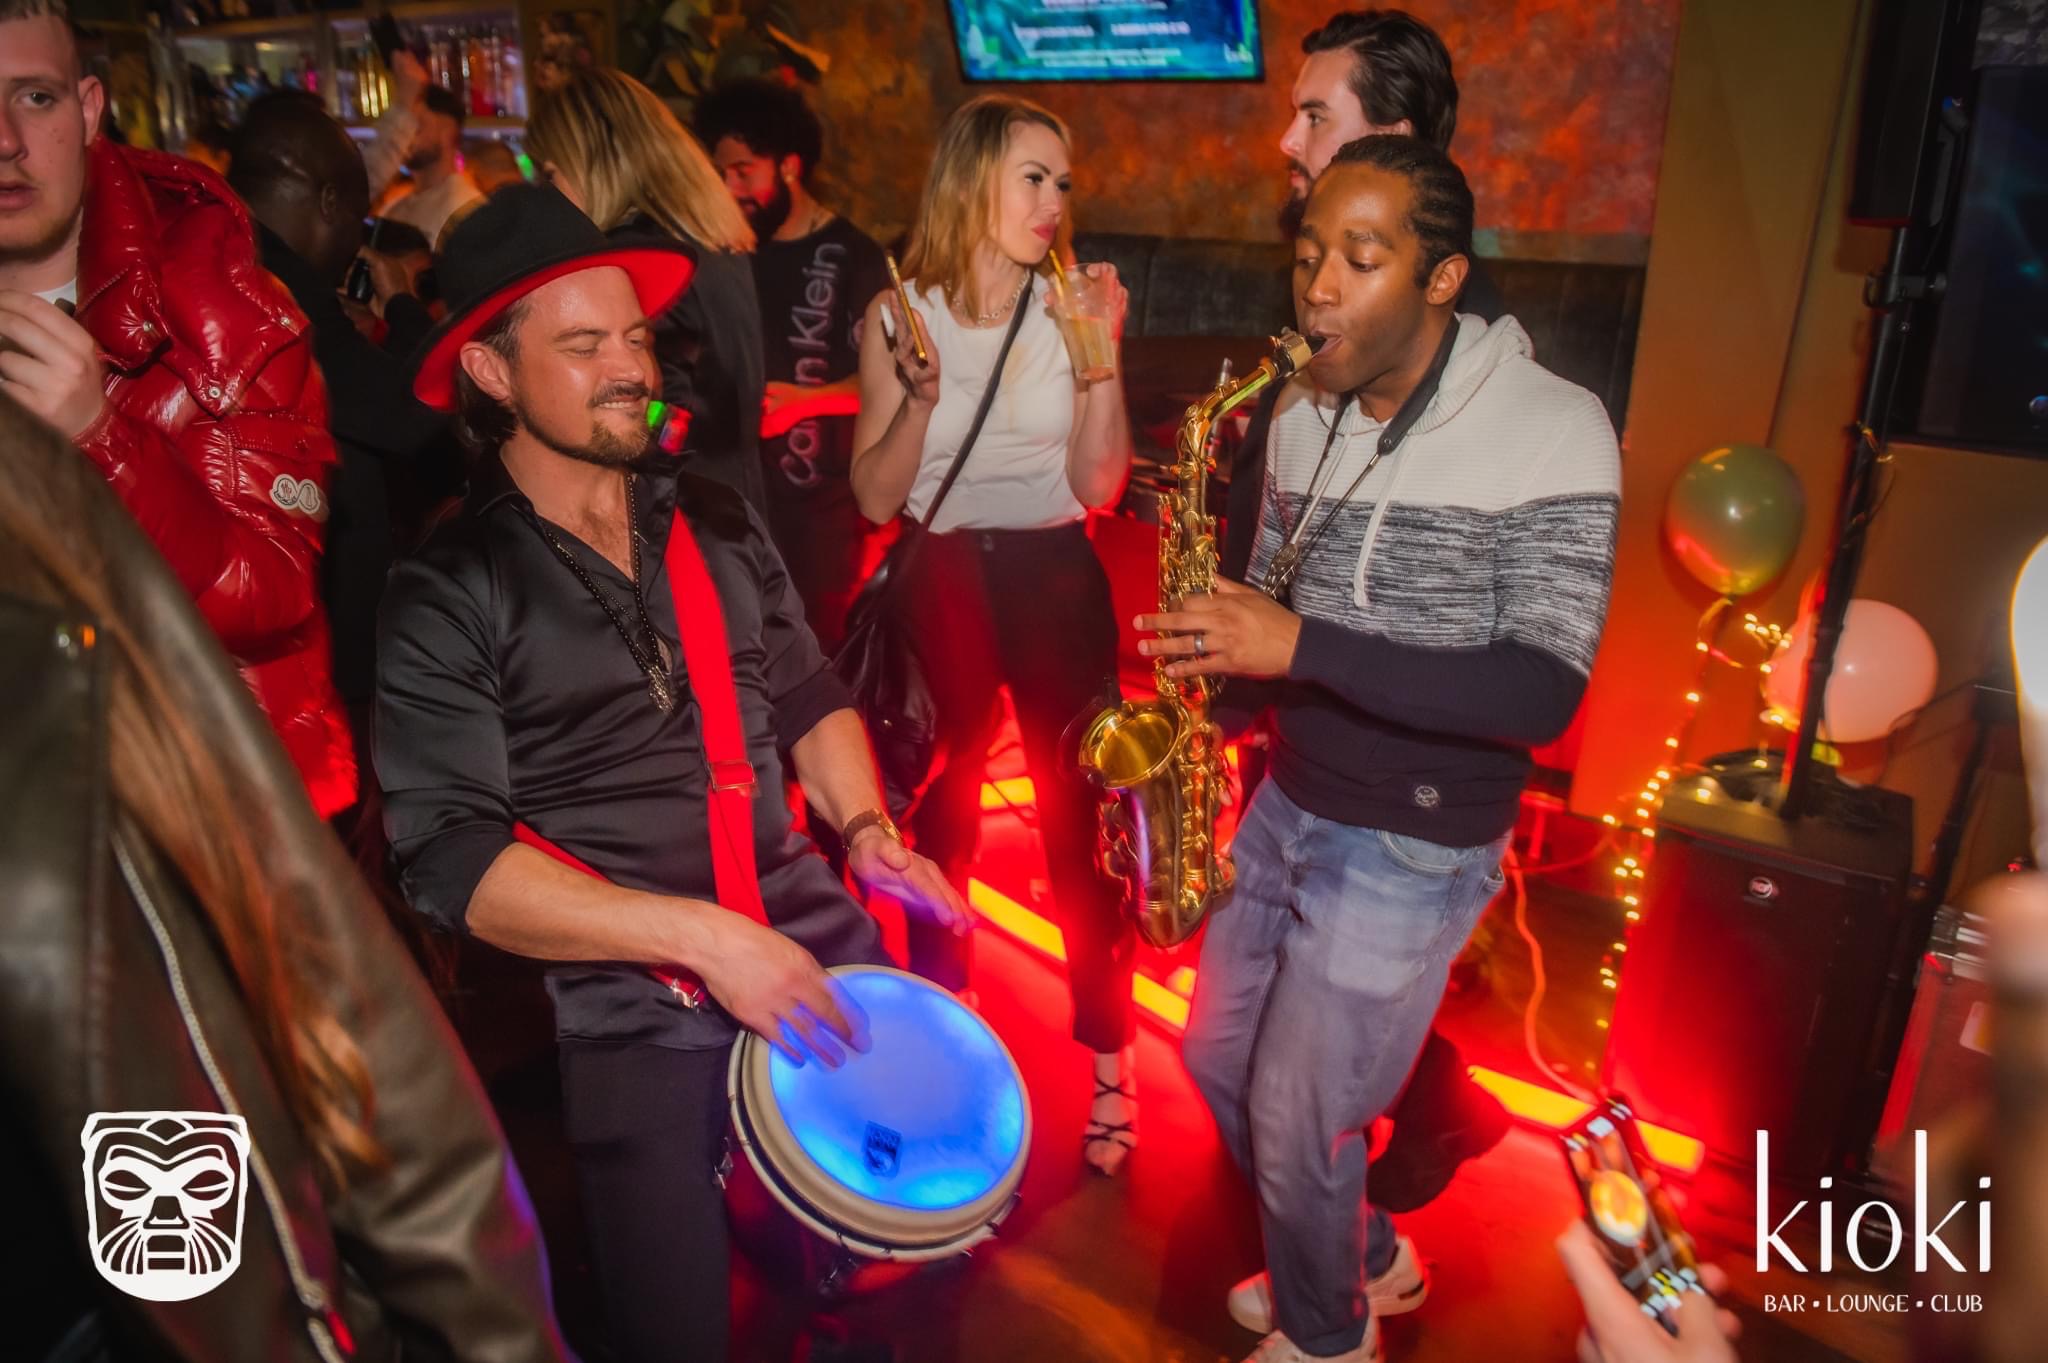 Devin playing saxophone with a percussionist in a nightclub